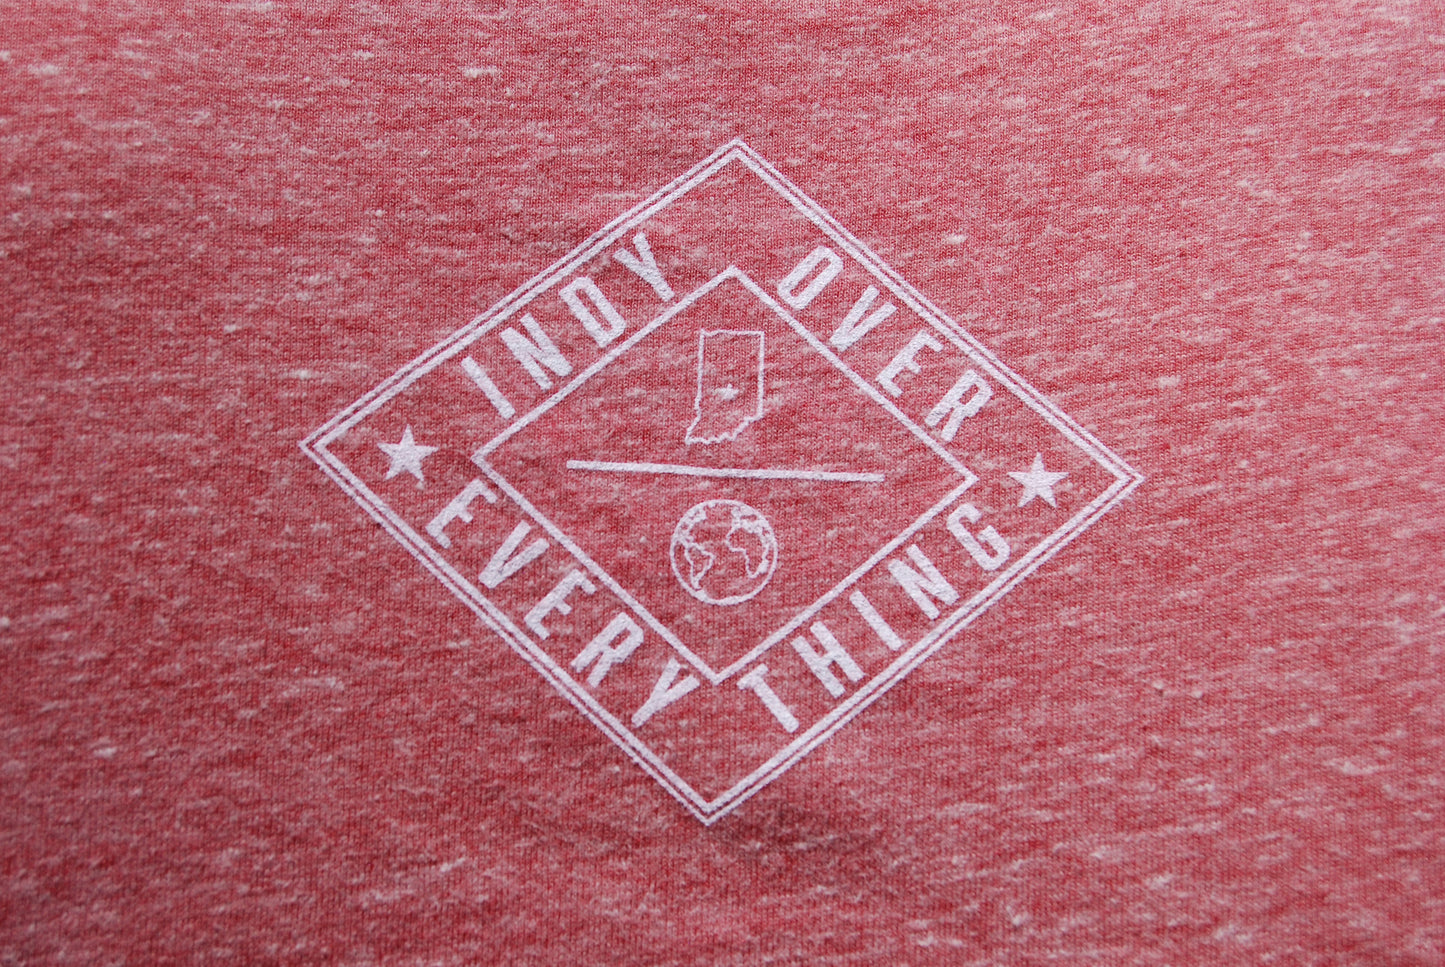 MENS LOGO TANK - HEATHER RED - Indy Over Everything